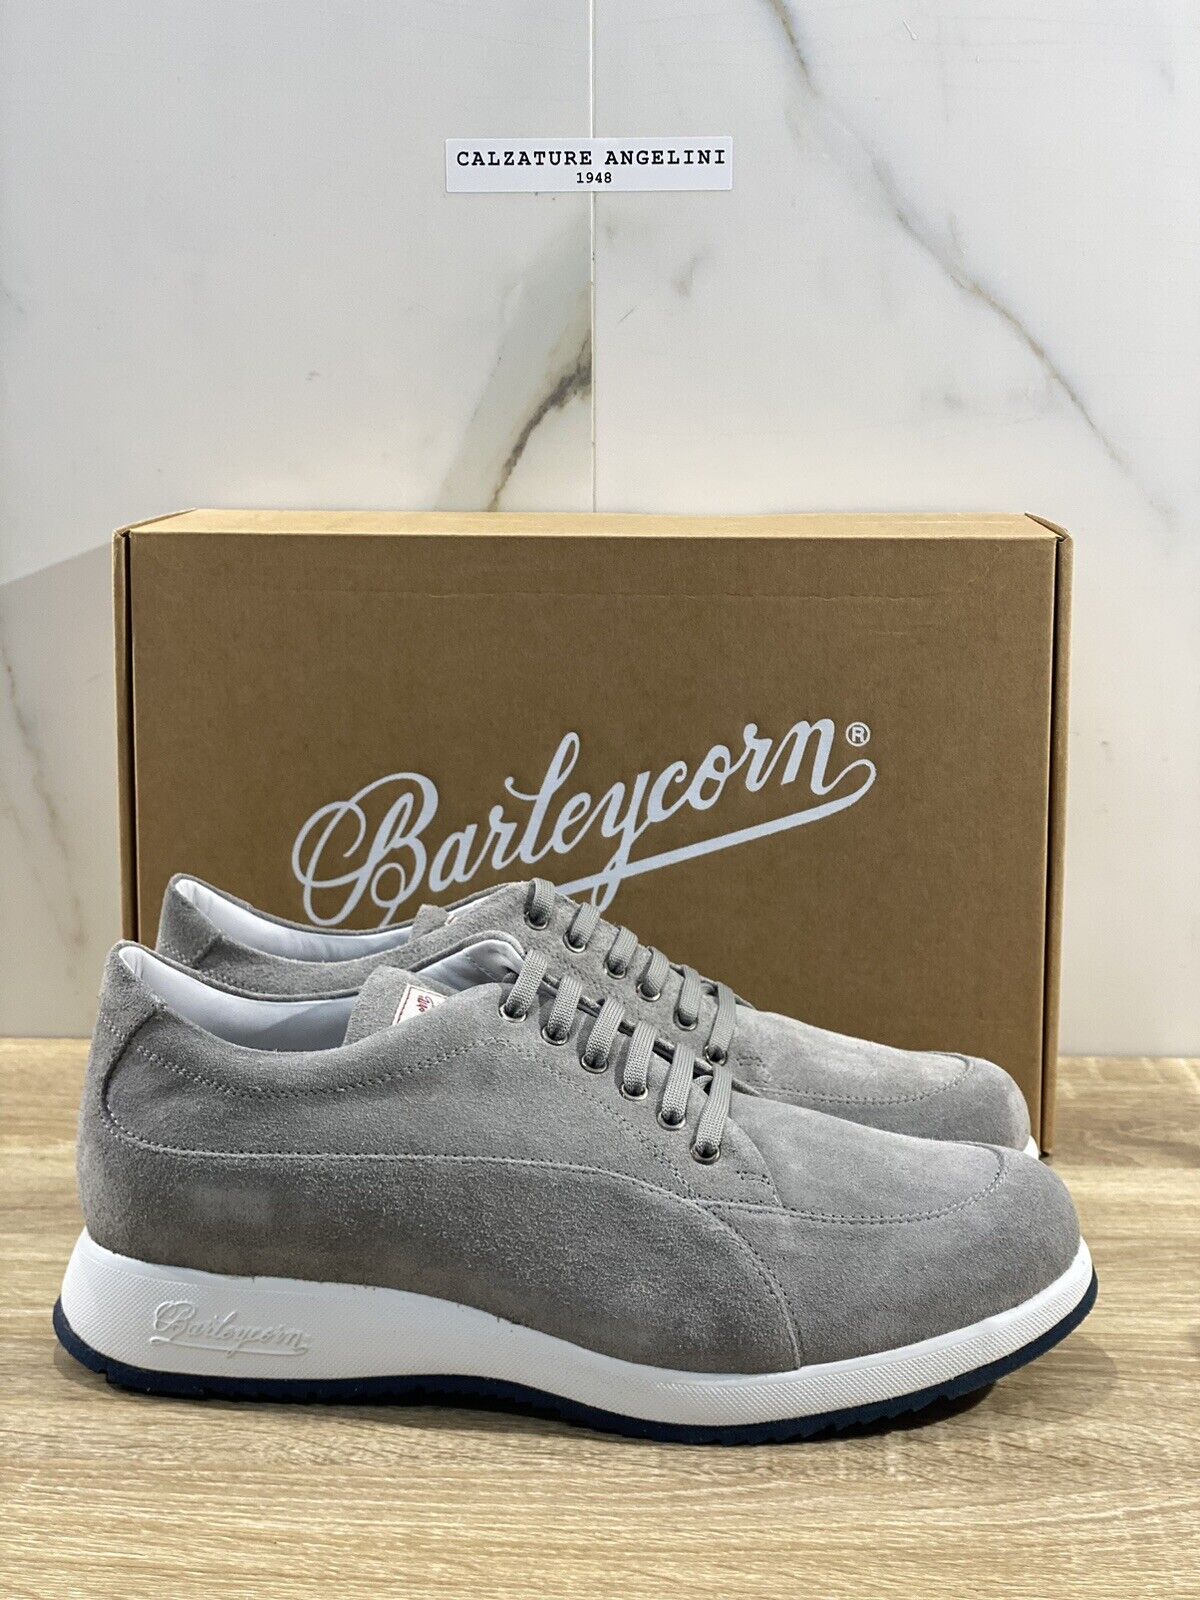 Barleycorn Sneaker Uomo New Classic Suede Grey Extralight Casual Men Shoes 47